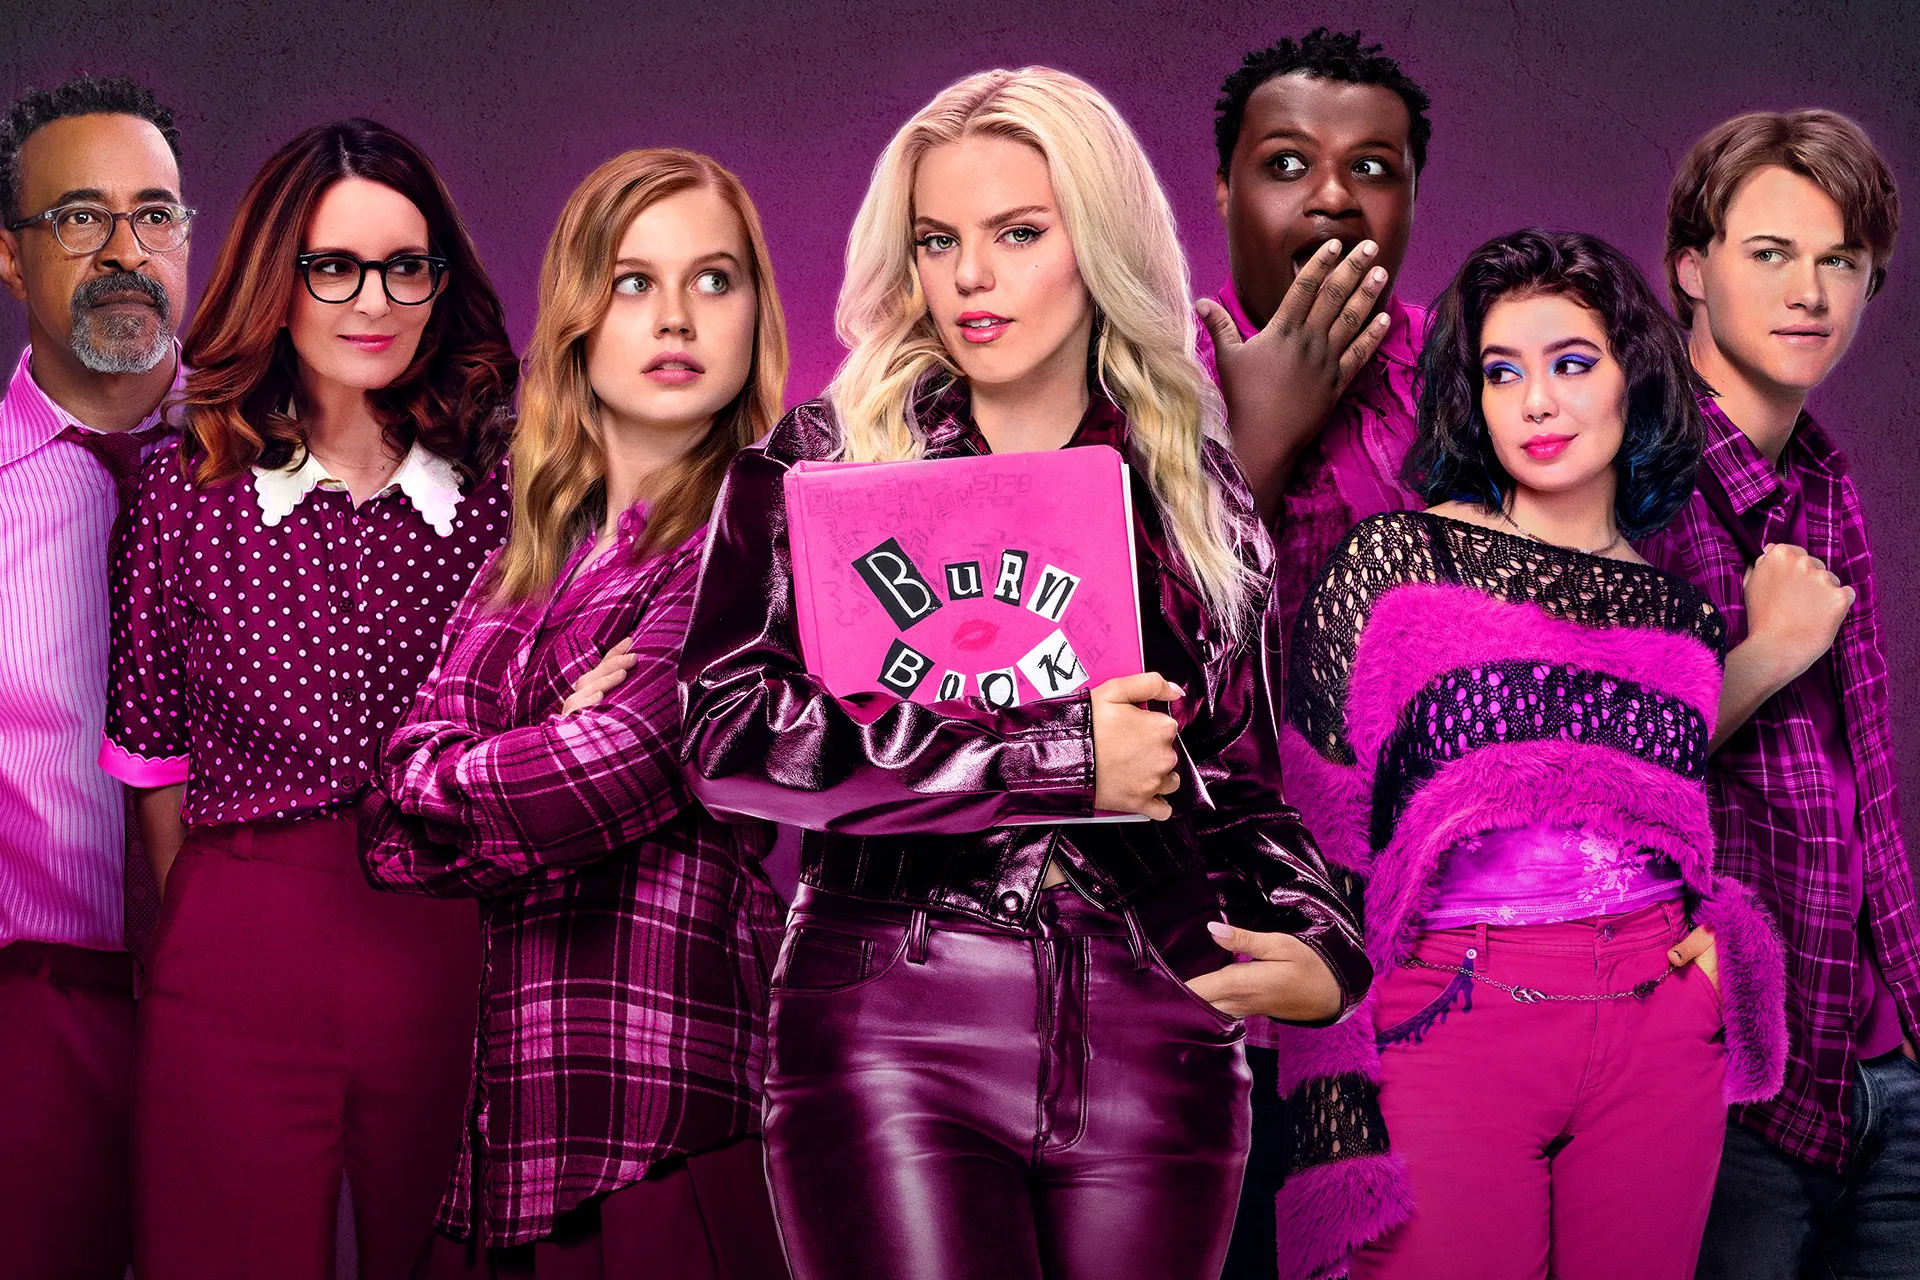 “Mean Girls: The Musical” is So Not Fetch